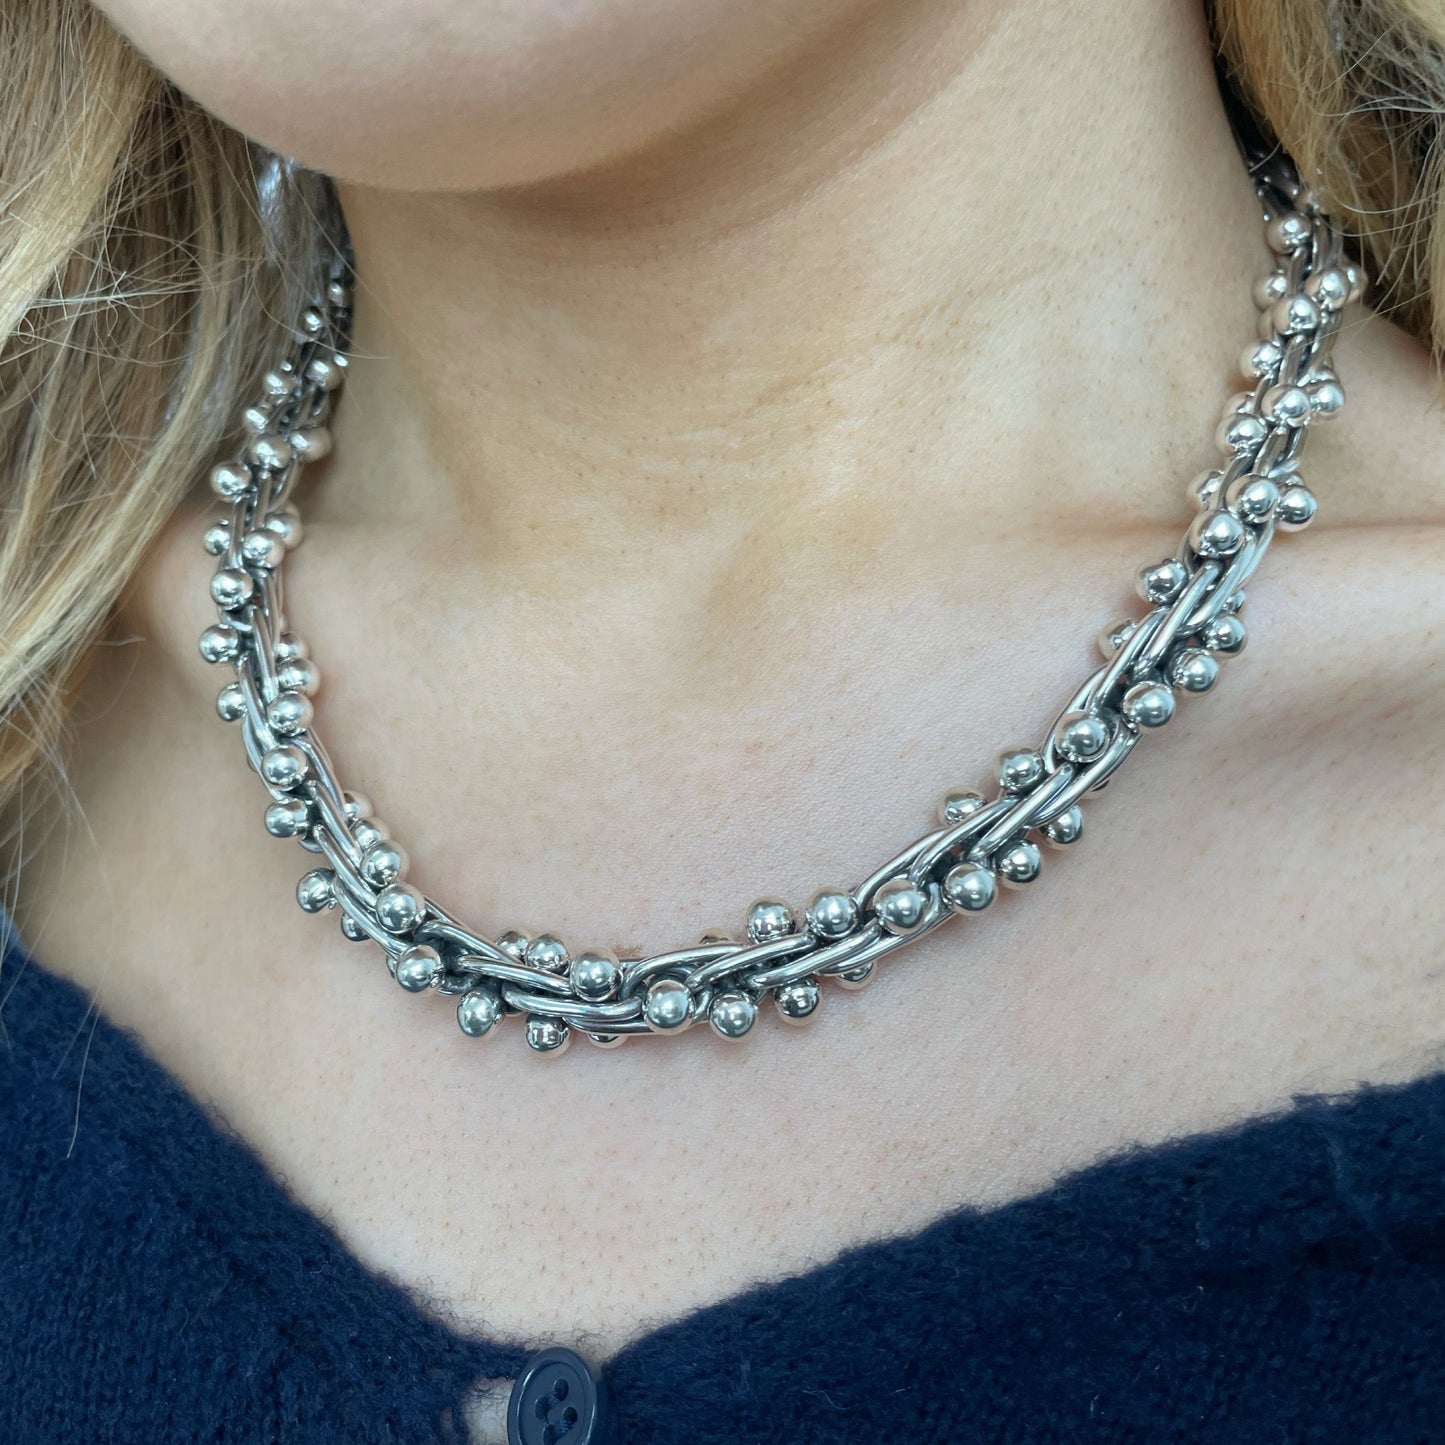 Solid Silver Spratling Style Peppercorn Necklace